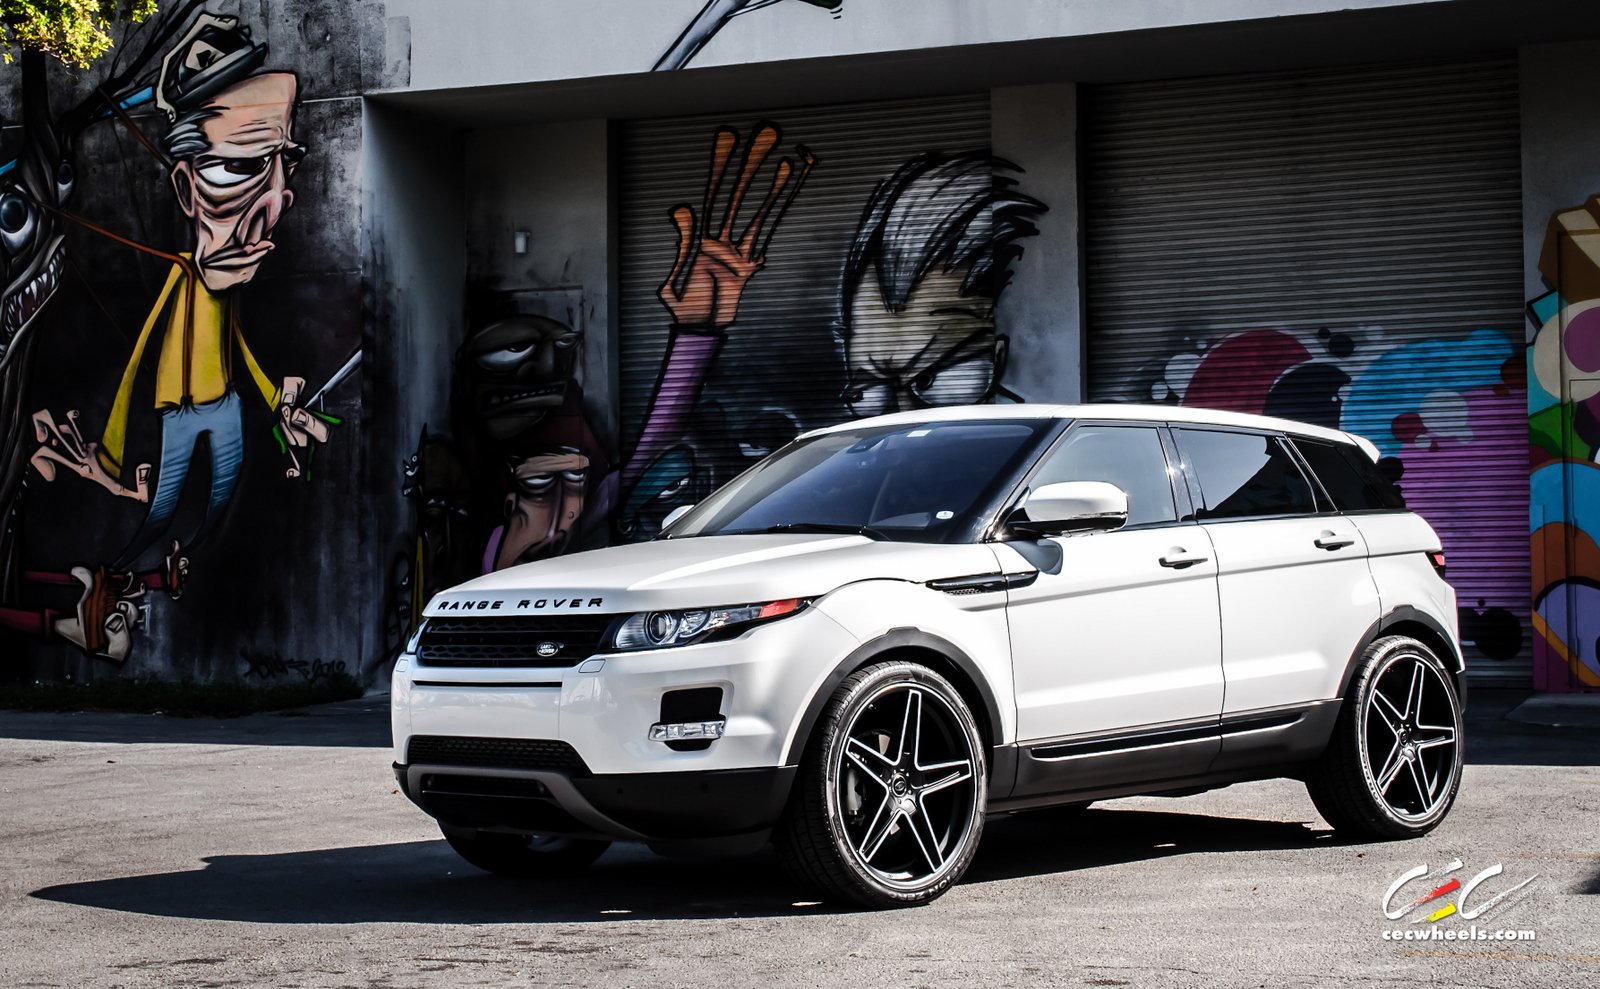 2015, Cec, Wheels, Tuning, Cars, Suv, Range, Rover, Evoque Wallpapers